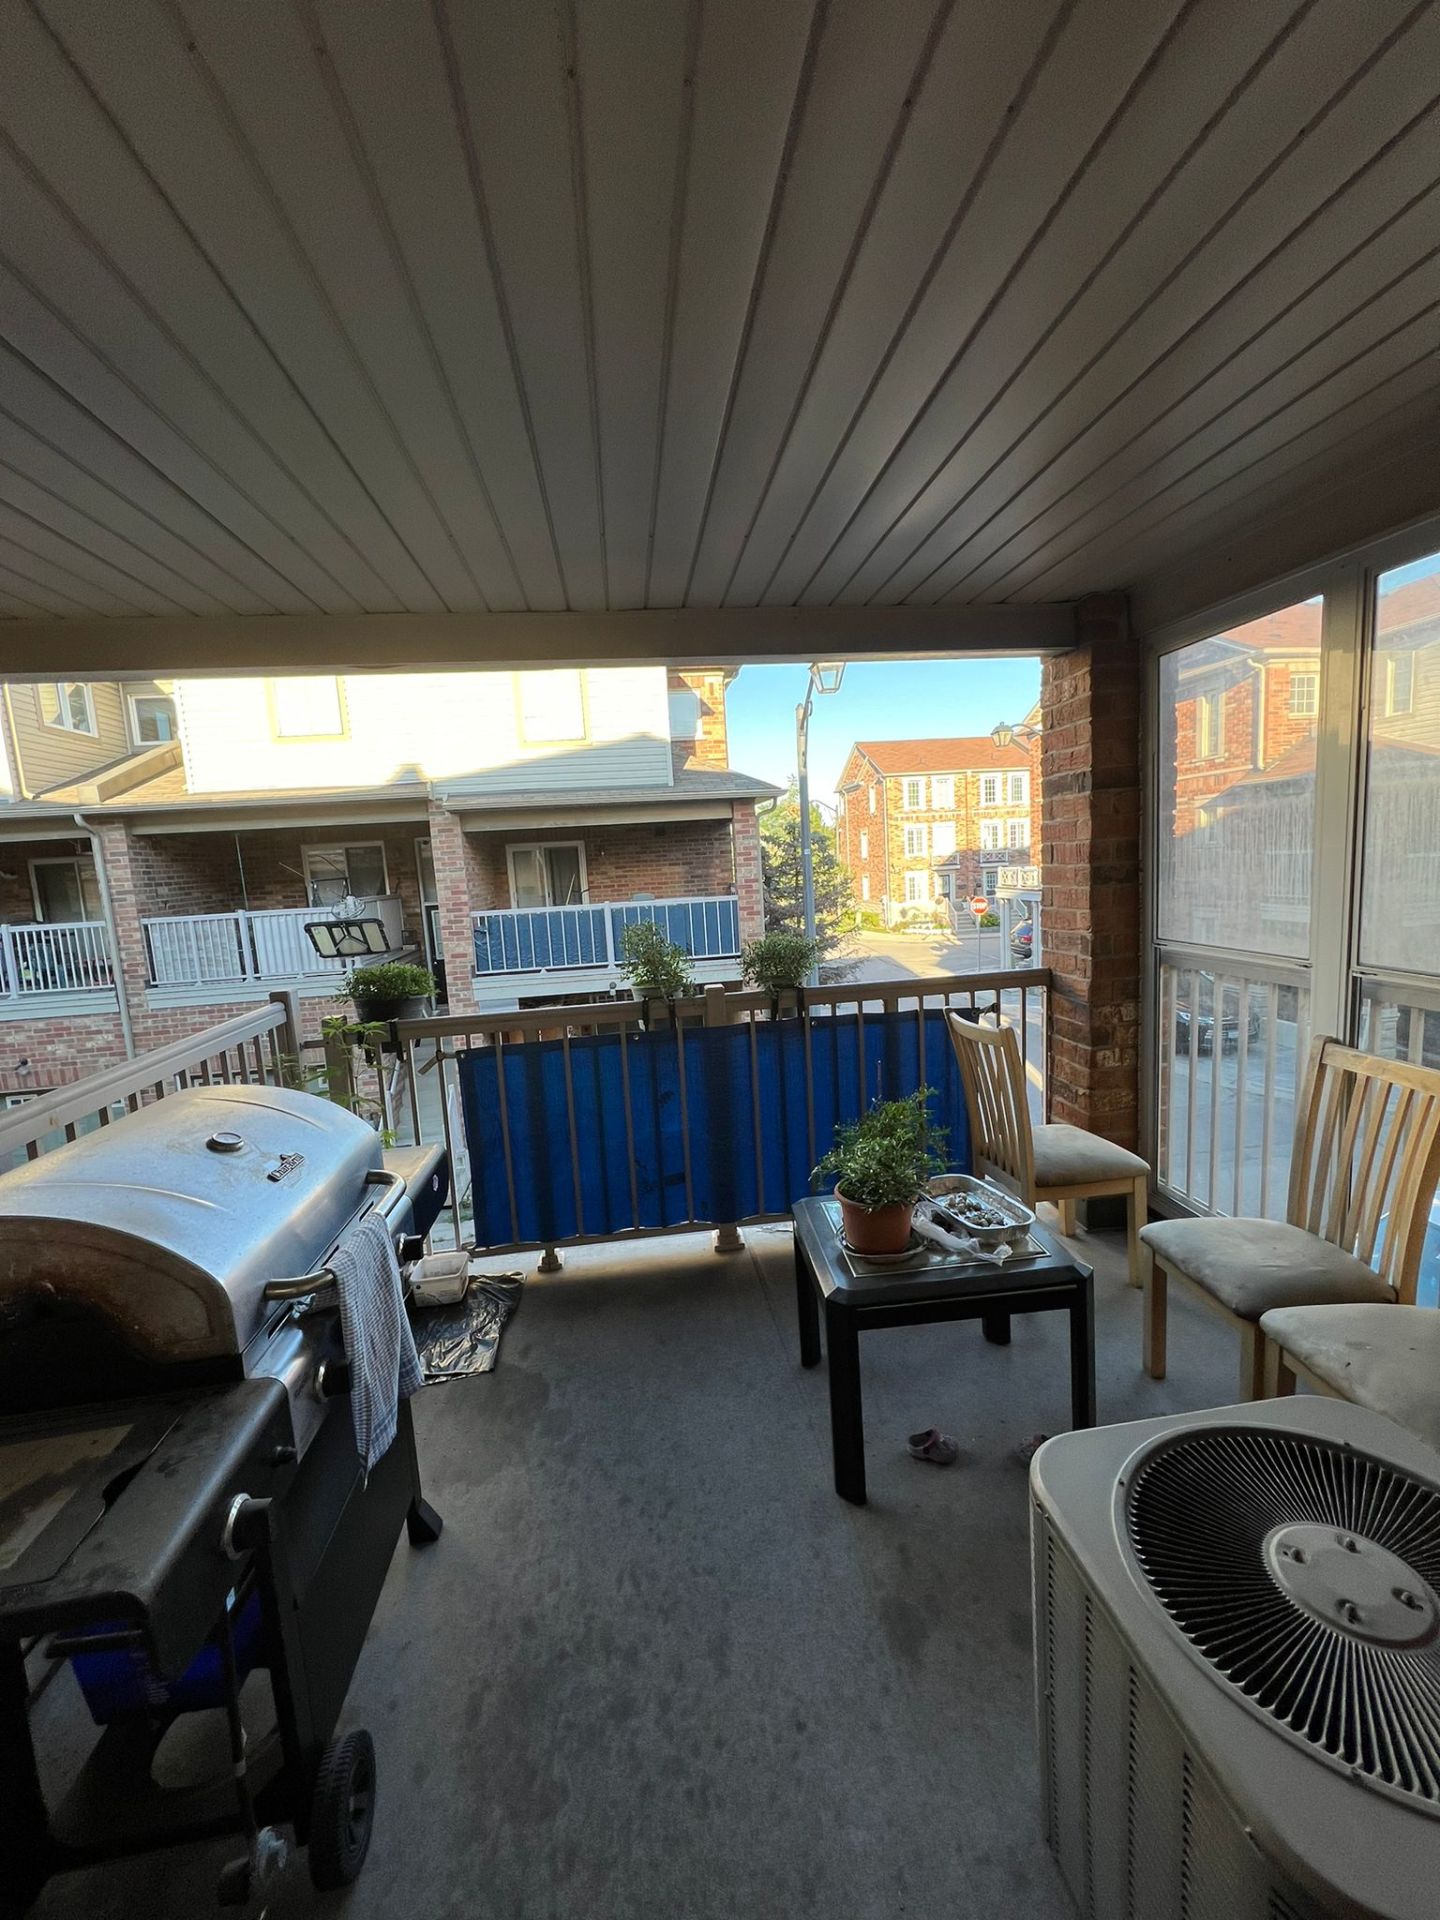 Premium Homestay Room - Torbarrie Rd, North York room for rent 59